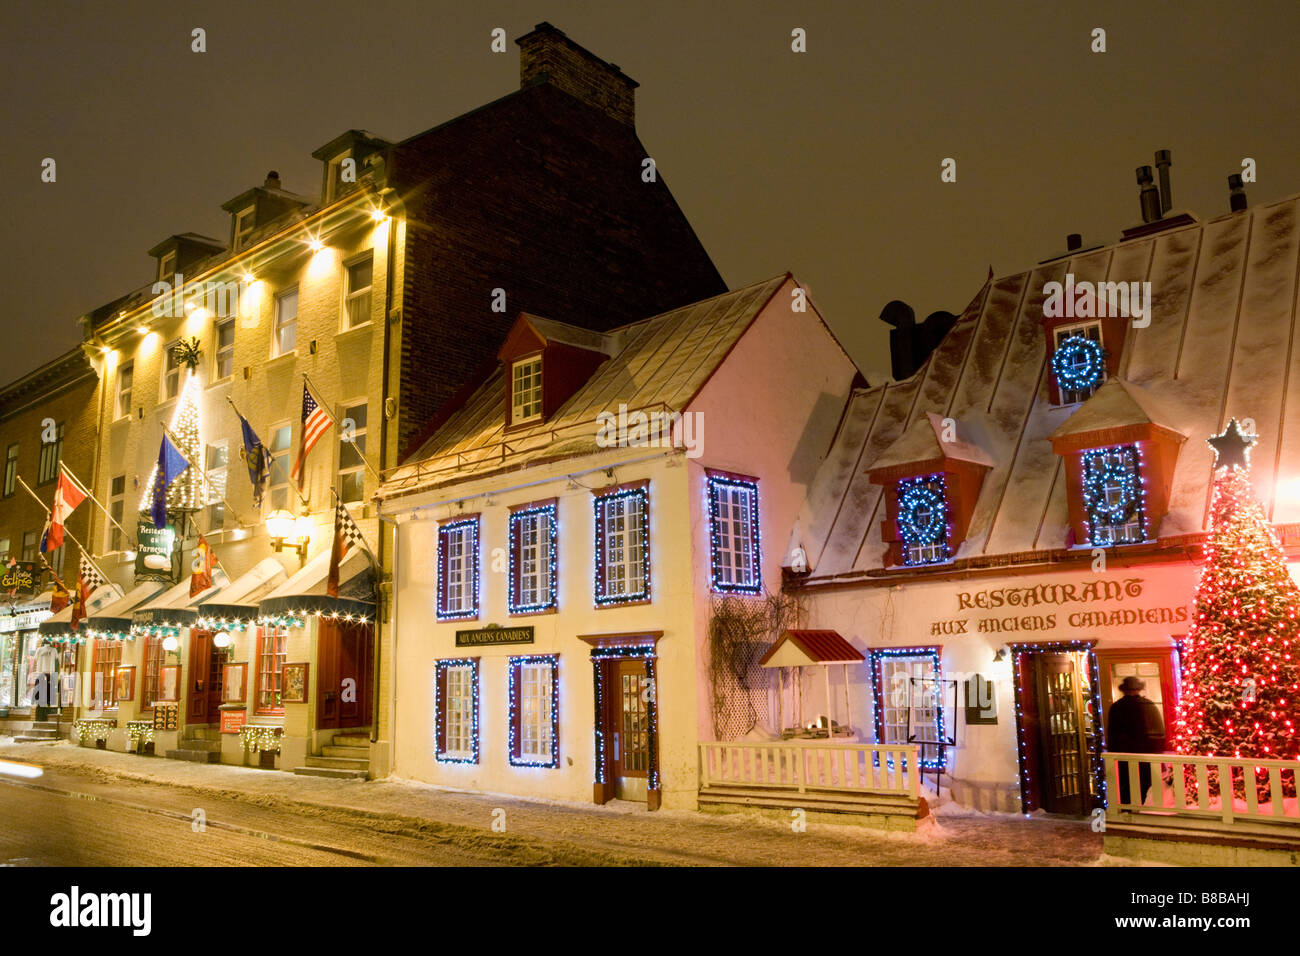 Famed restaurant Aux Anciens Canadiens Old Quebec City Stock Photo